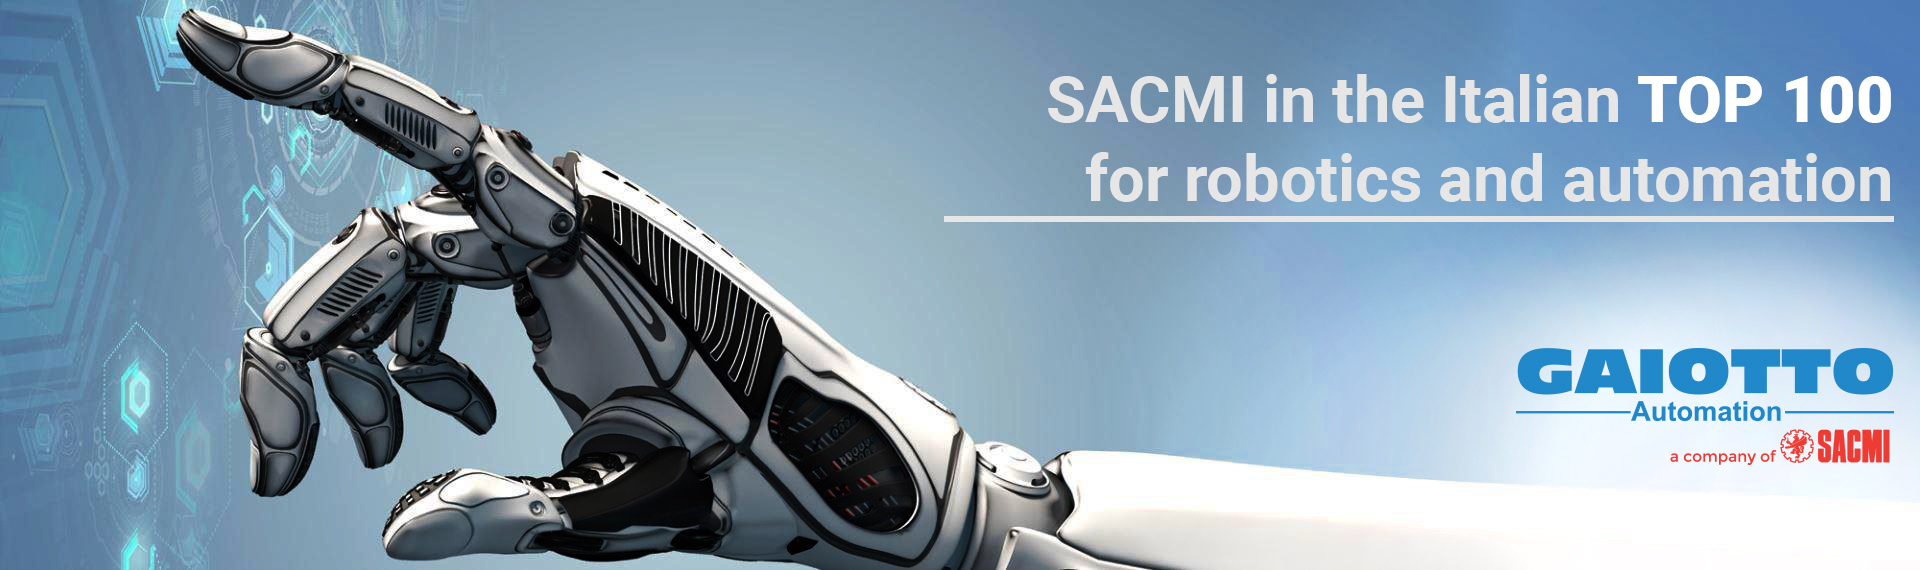 SACMI in the Italian top 100 for robotics and automation